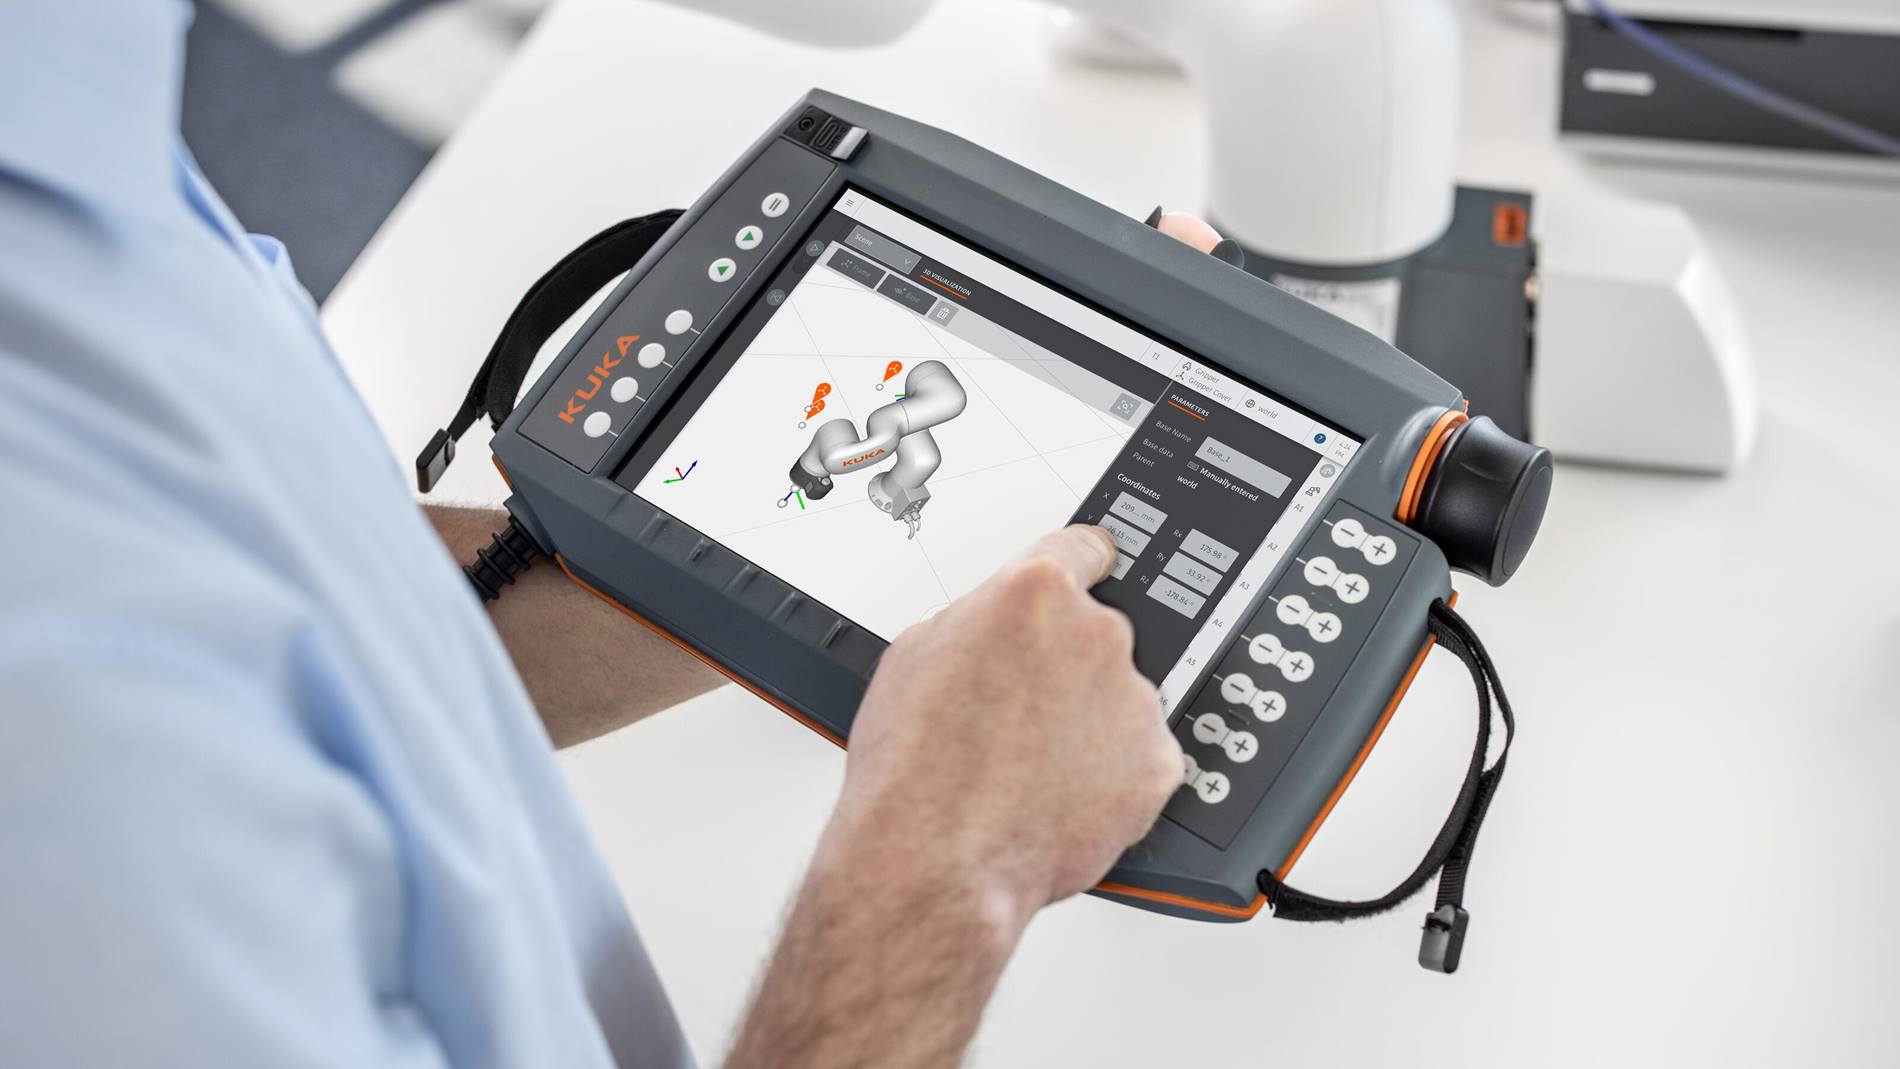 The smartPAD pro can be used to operate all KUKA products that run the new iiQKA.OS operating system.